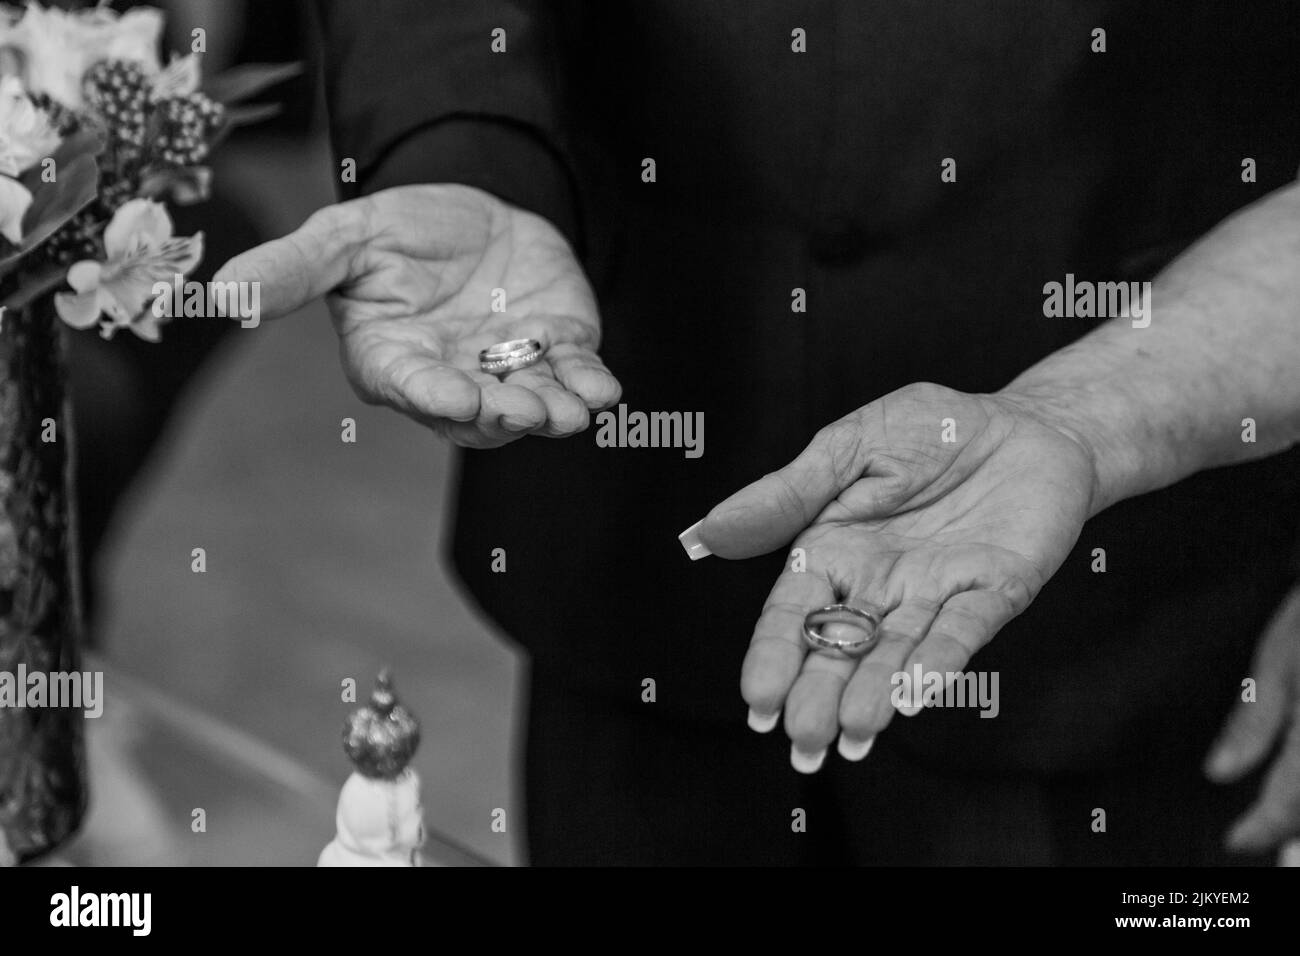 A grayscale shot of the hands of a man and a woman showing their wedding rings on their open palms Stock Photo